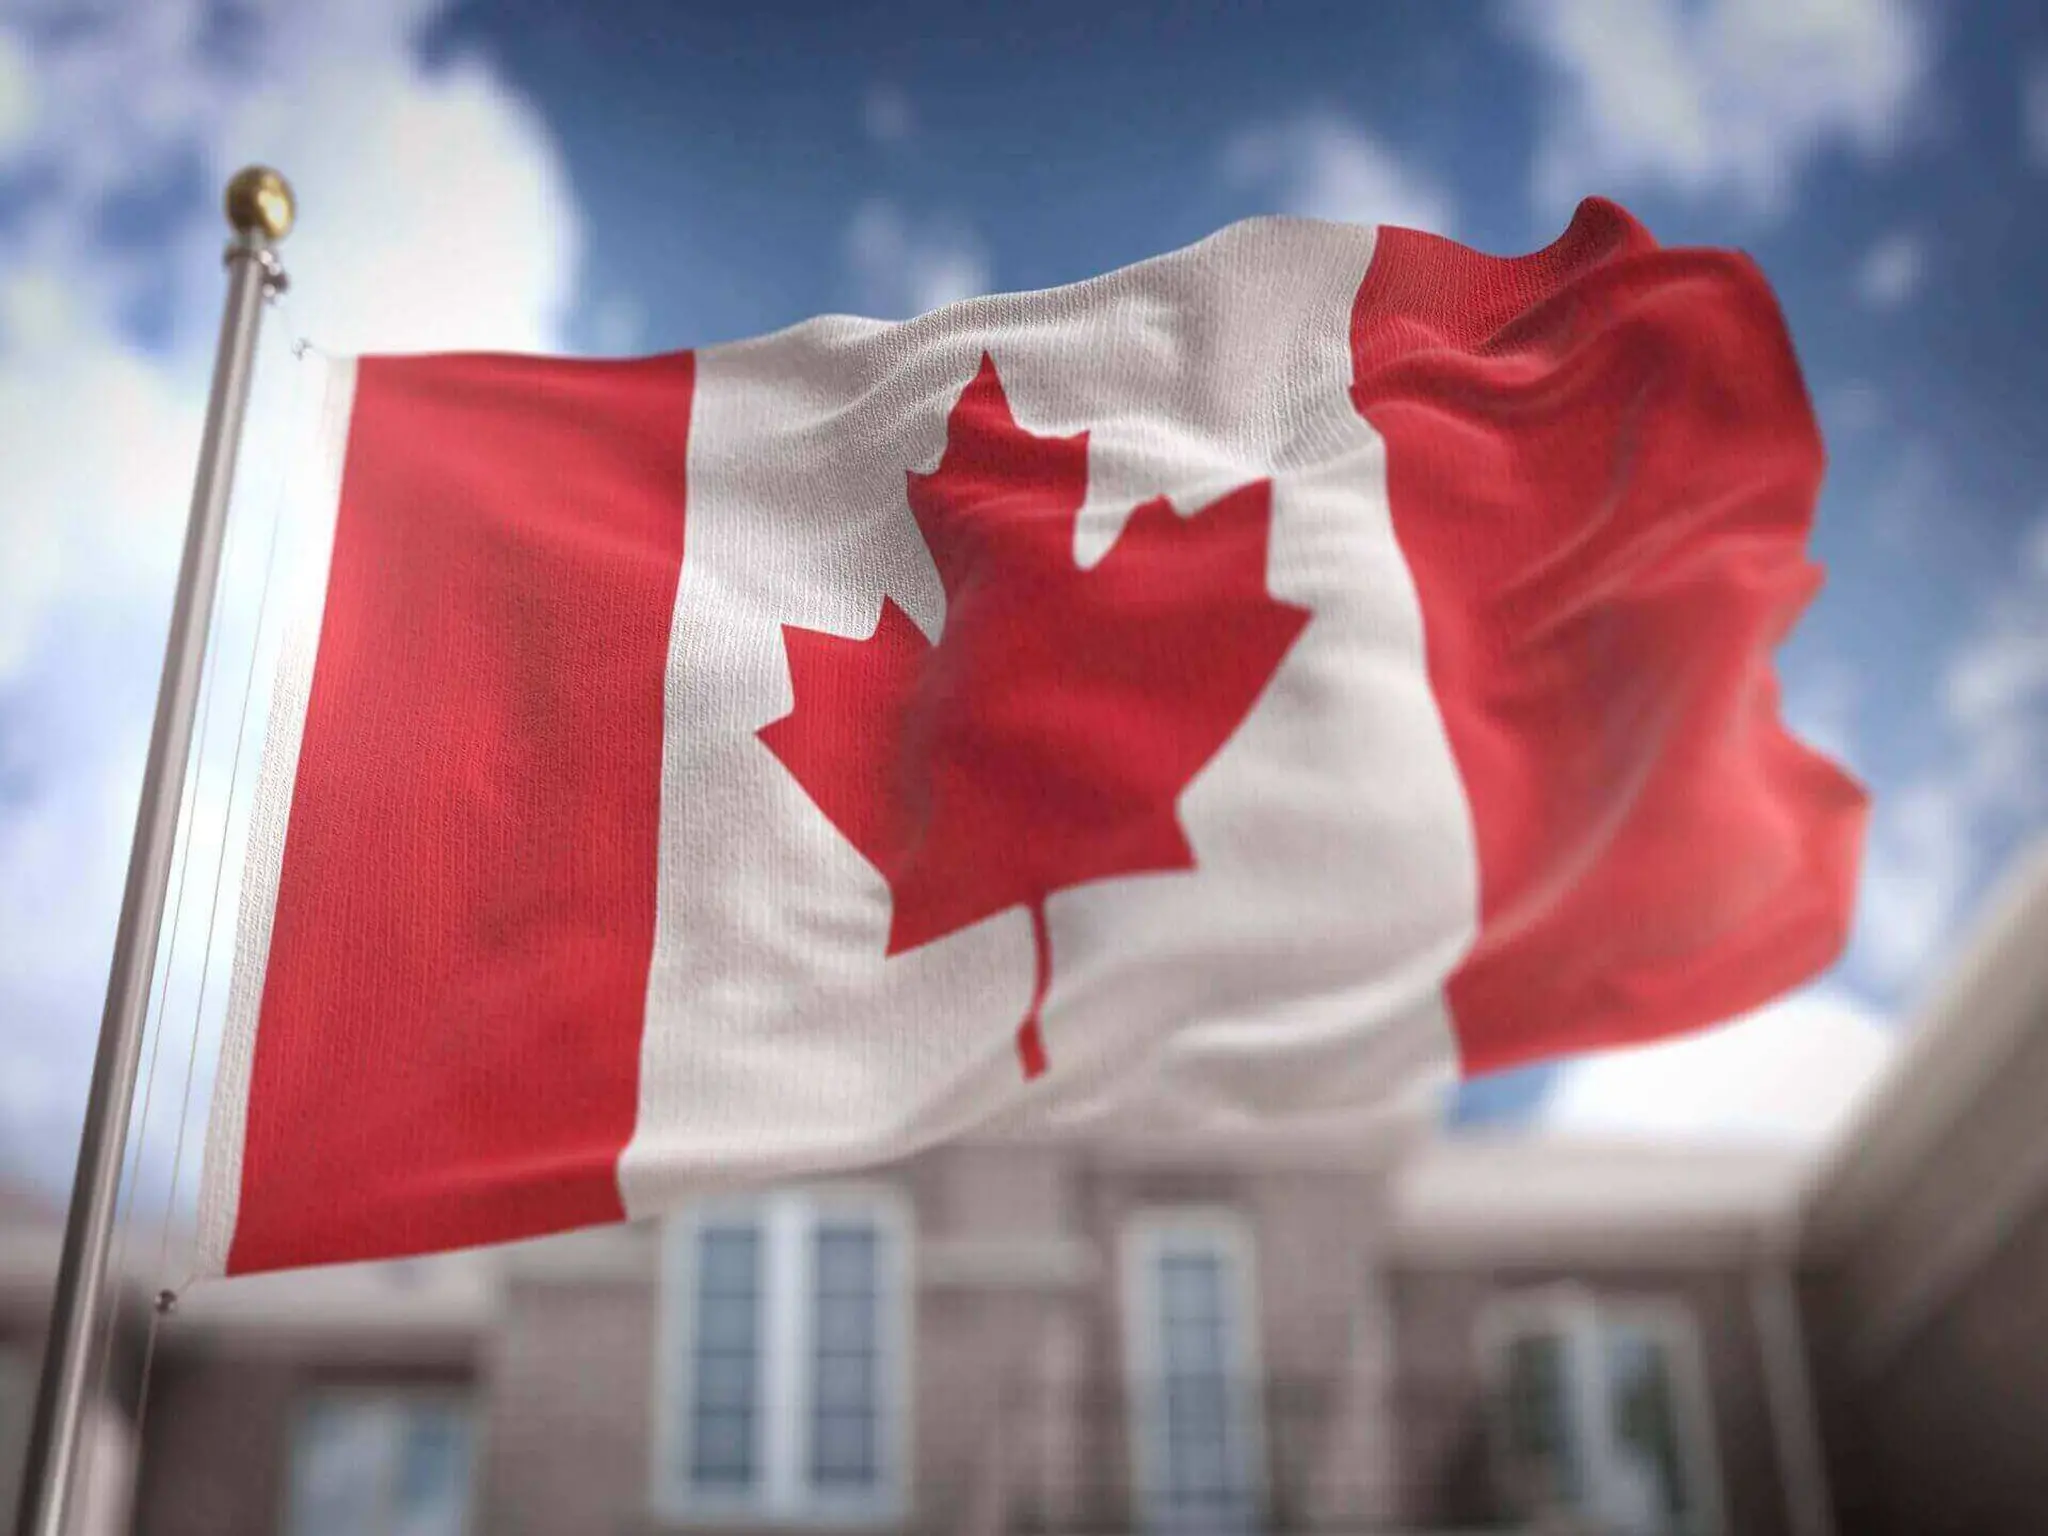 The IRCC sets regulations for employing foreign temporary workers in Canada through the TFWP